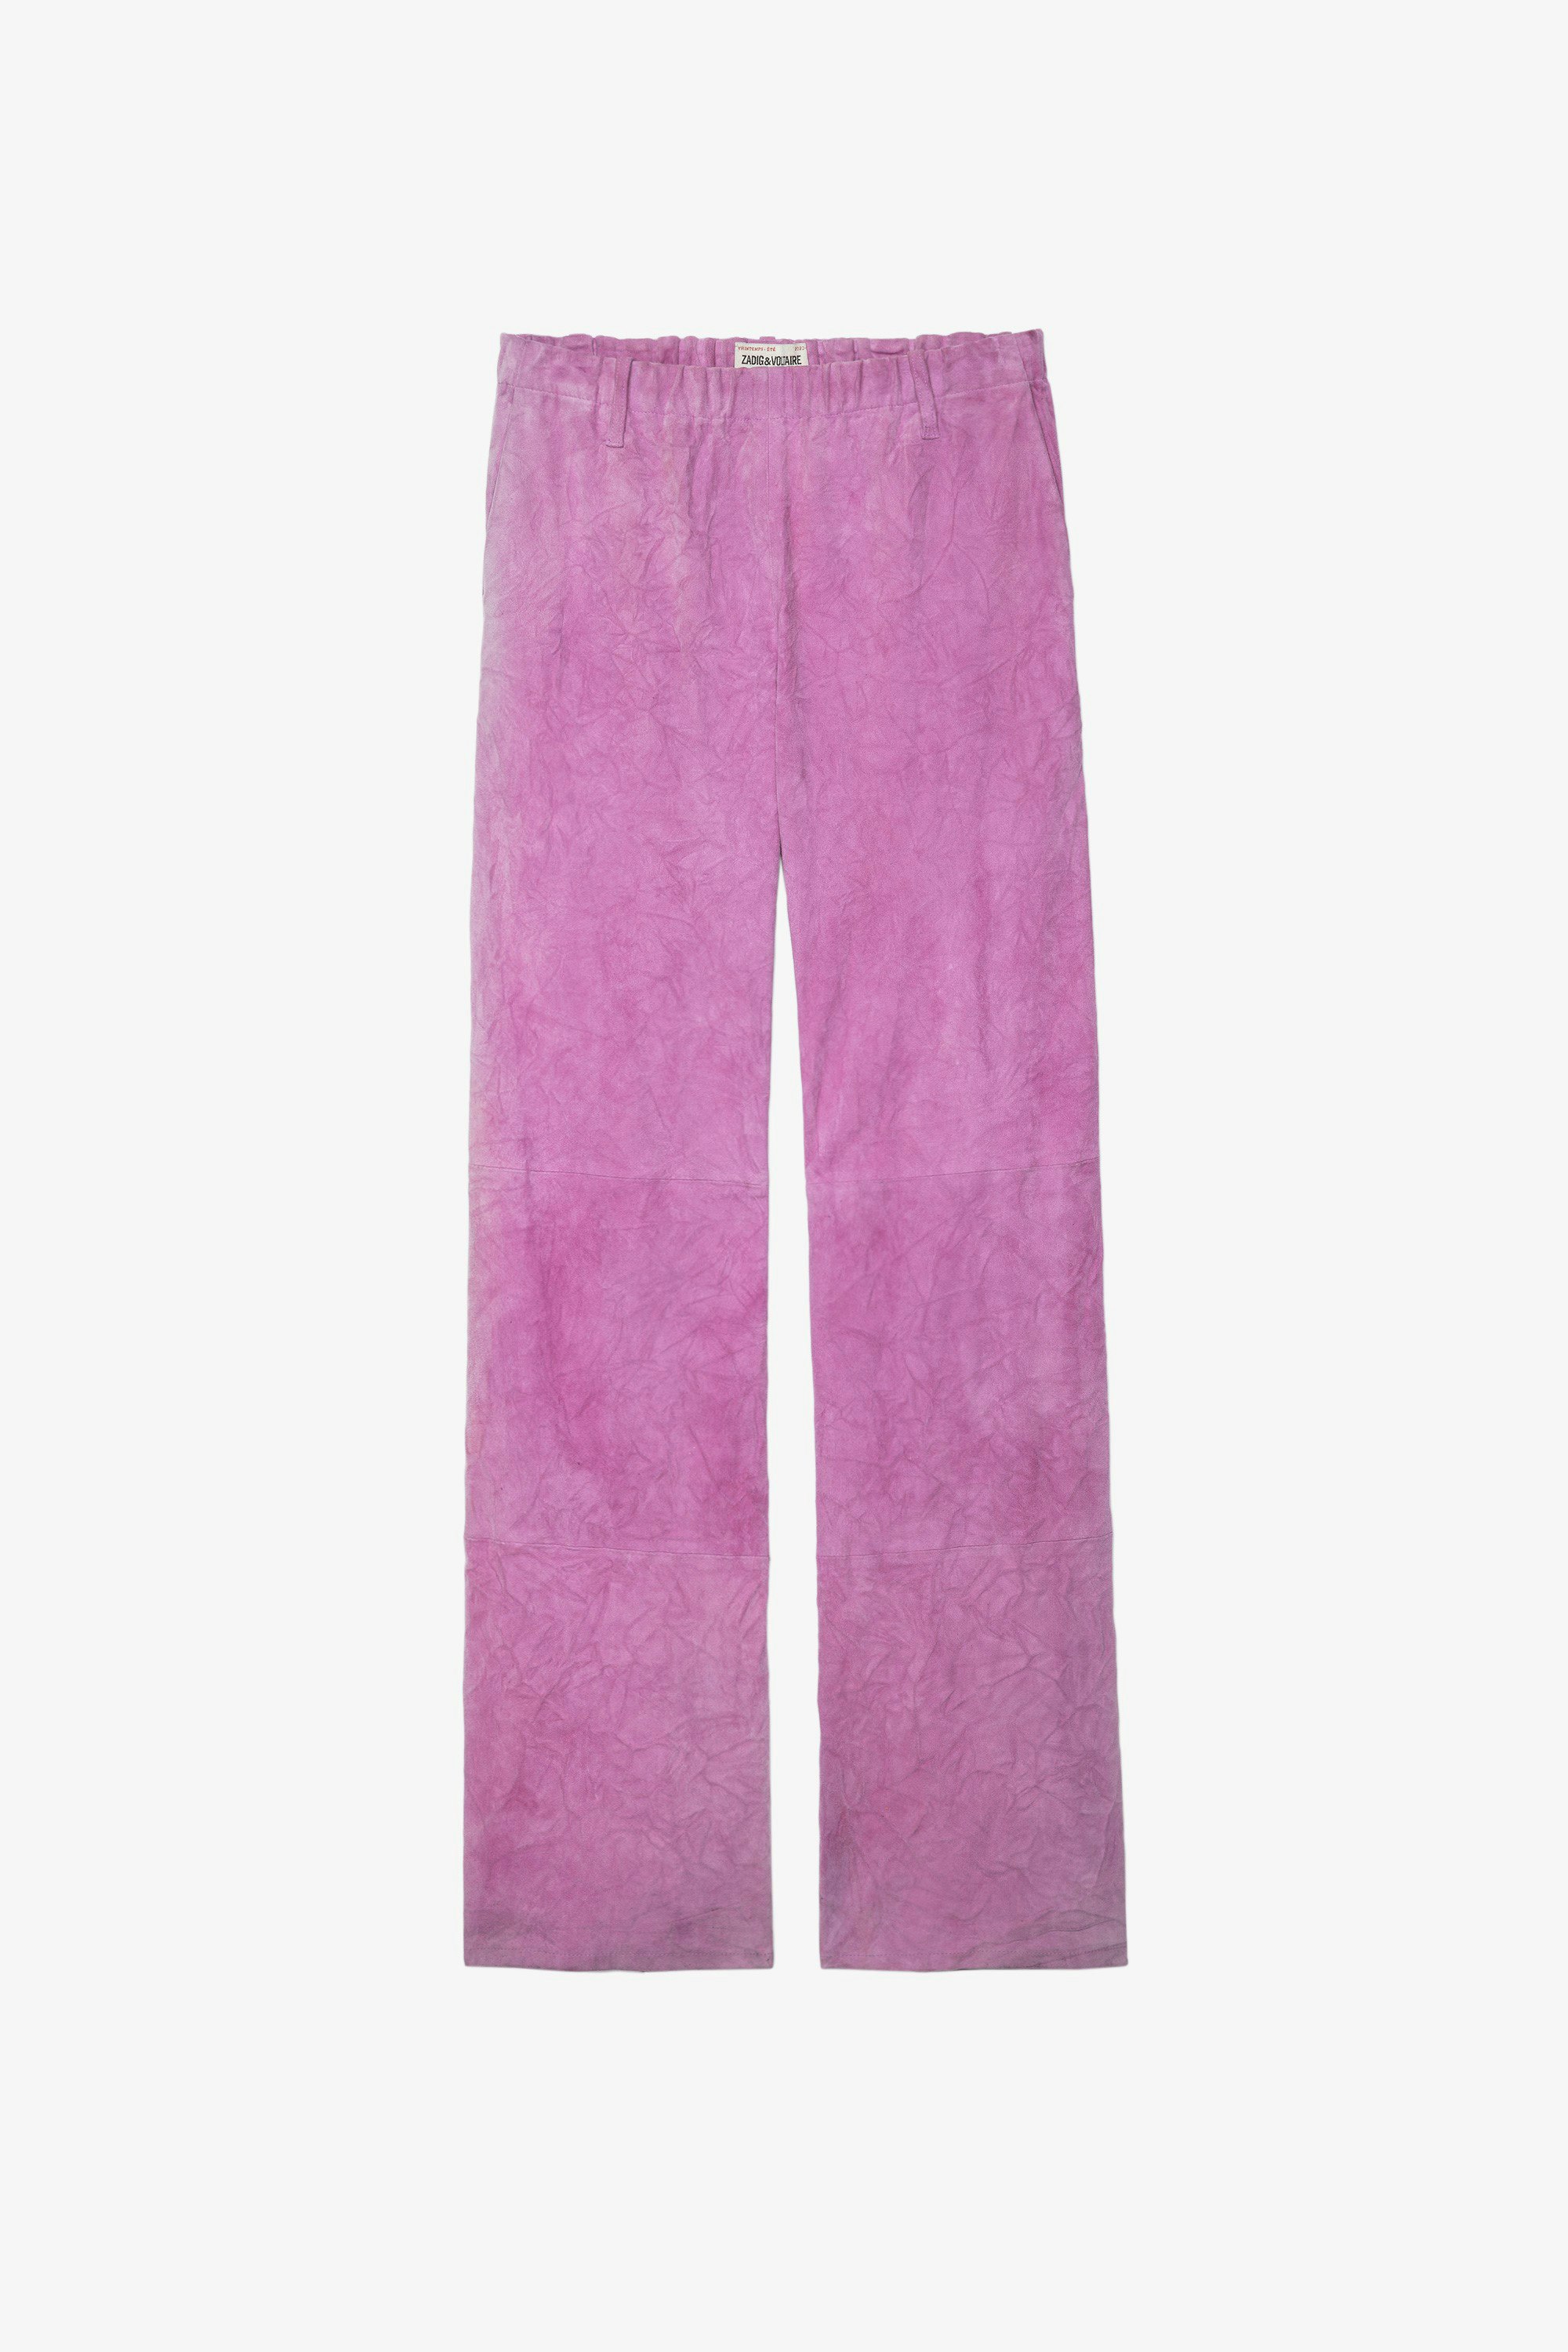 Parfait Creased Suede Trousers Women’s pink creased suede wide-leg trousers